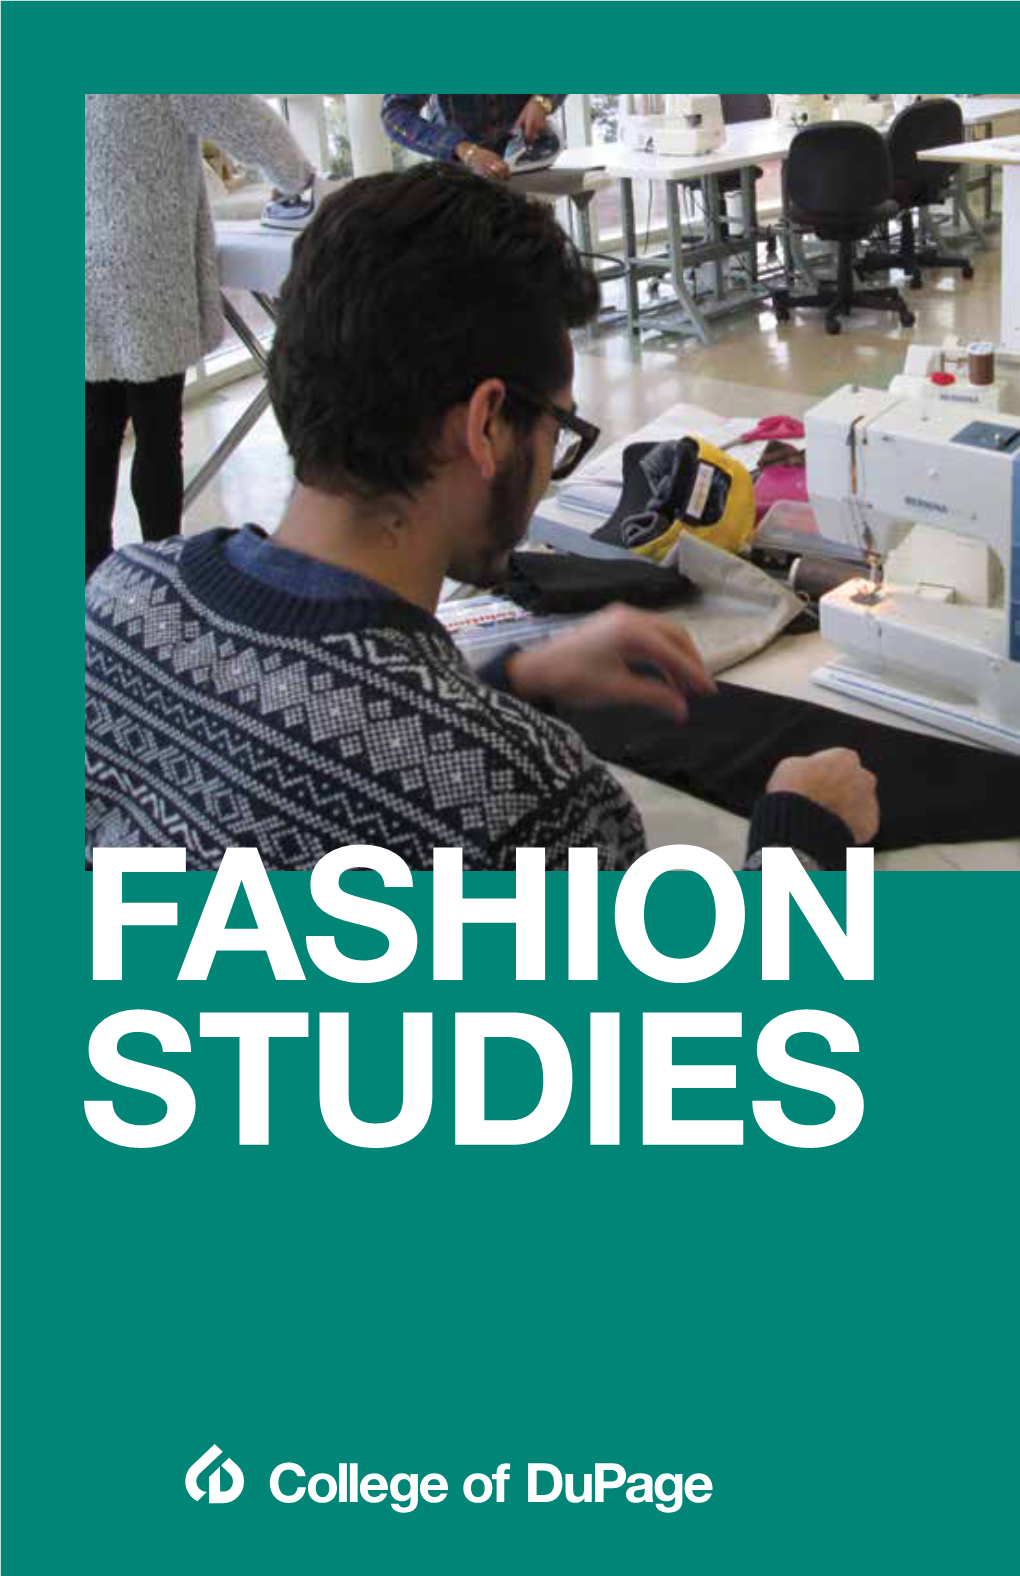 FASHION STUDIES CAREER OPPORTUNITIES ABOUND in FASHION! the Industry Is Large and Growing Because Americans Spend a Respectable Amount of Their Budget on Clothing